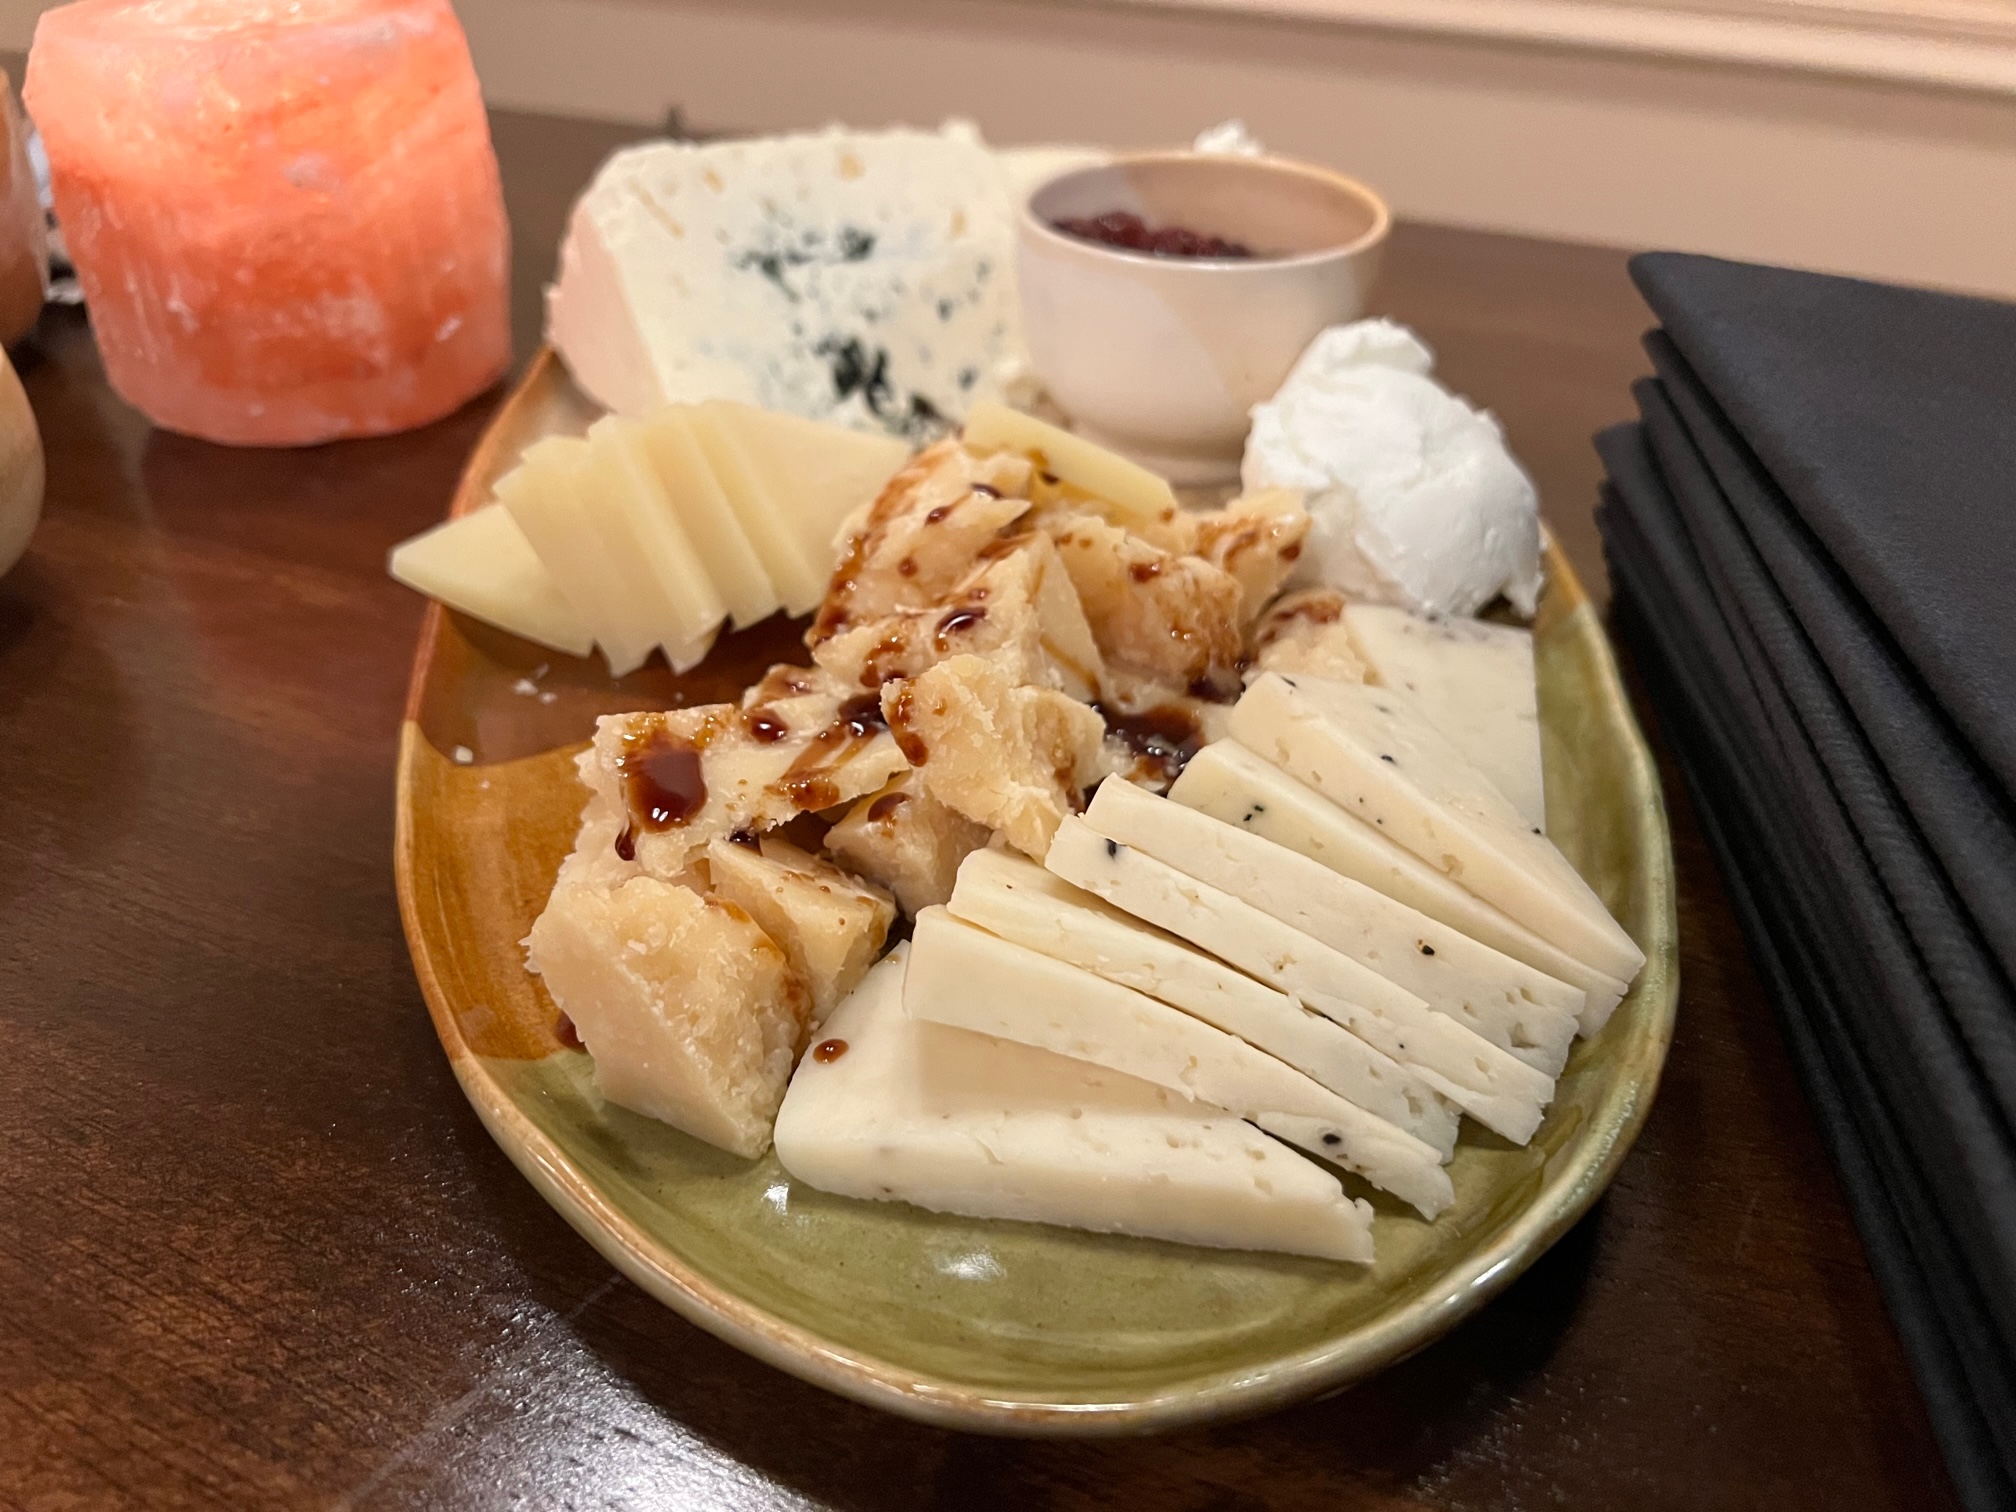 On a green-gray platter, there are a variety of cheeses. Photo by Alyssa Buckley.